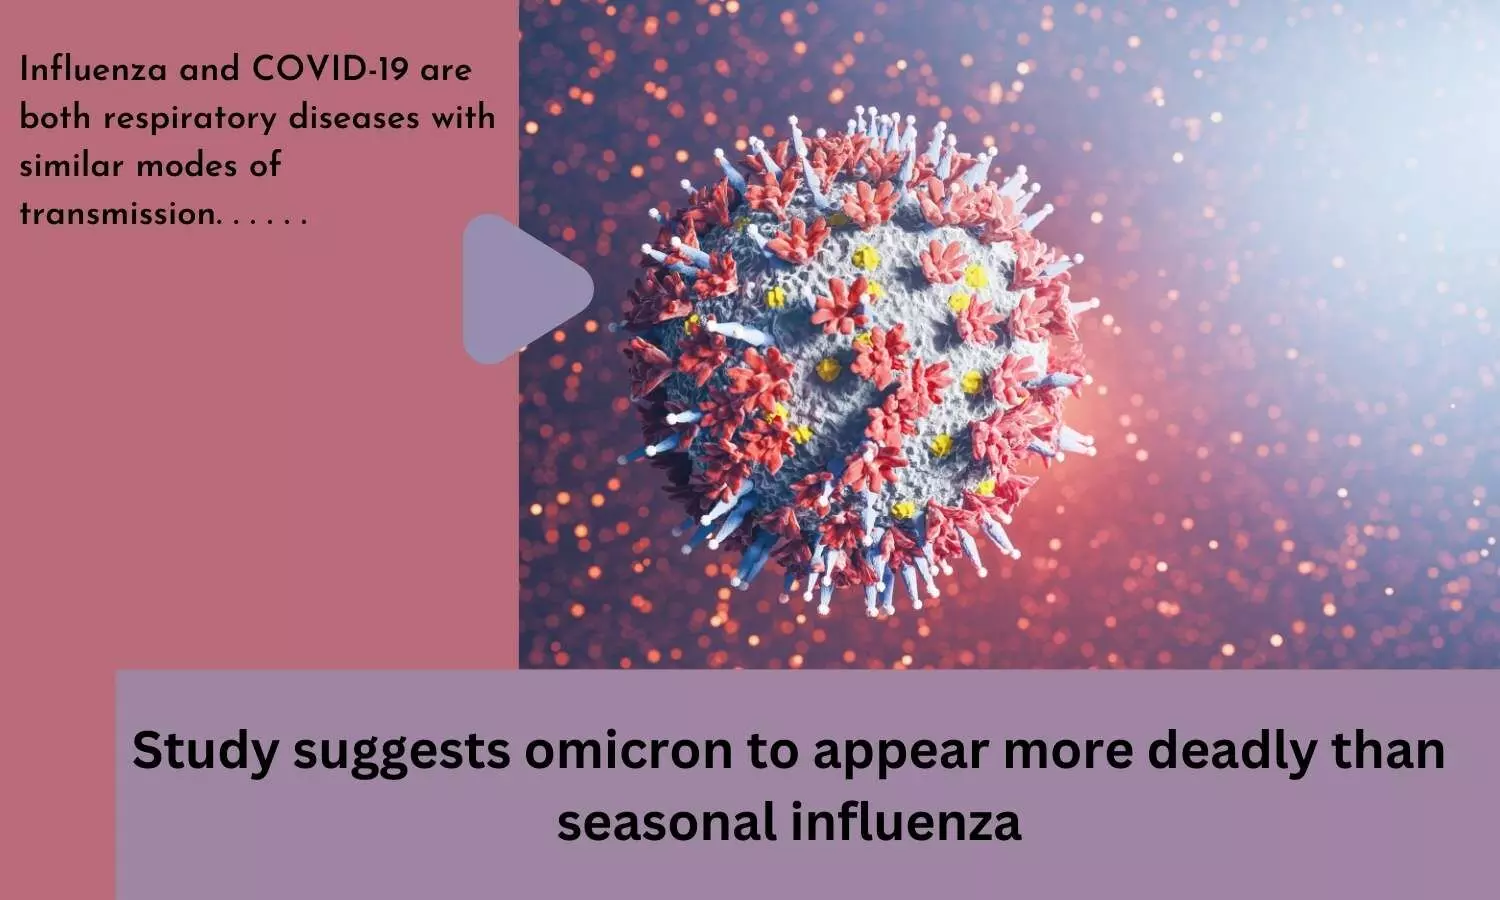 Study suggests omicron to appear more deadly than seasonal influenza